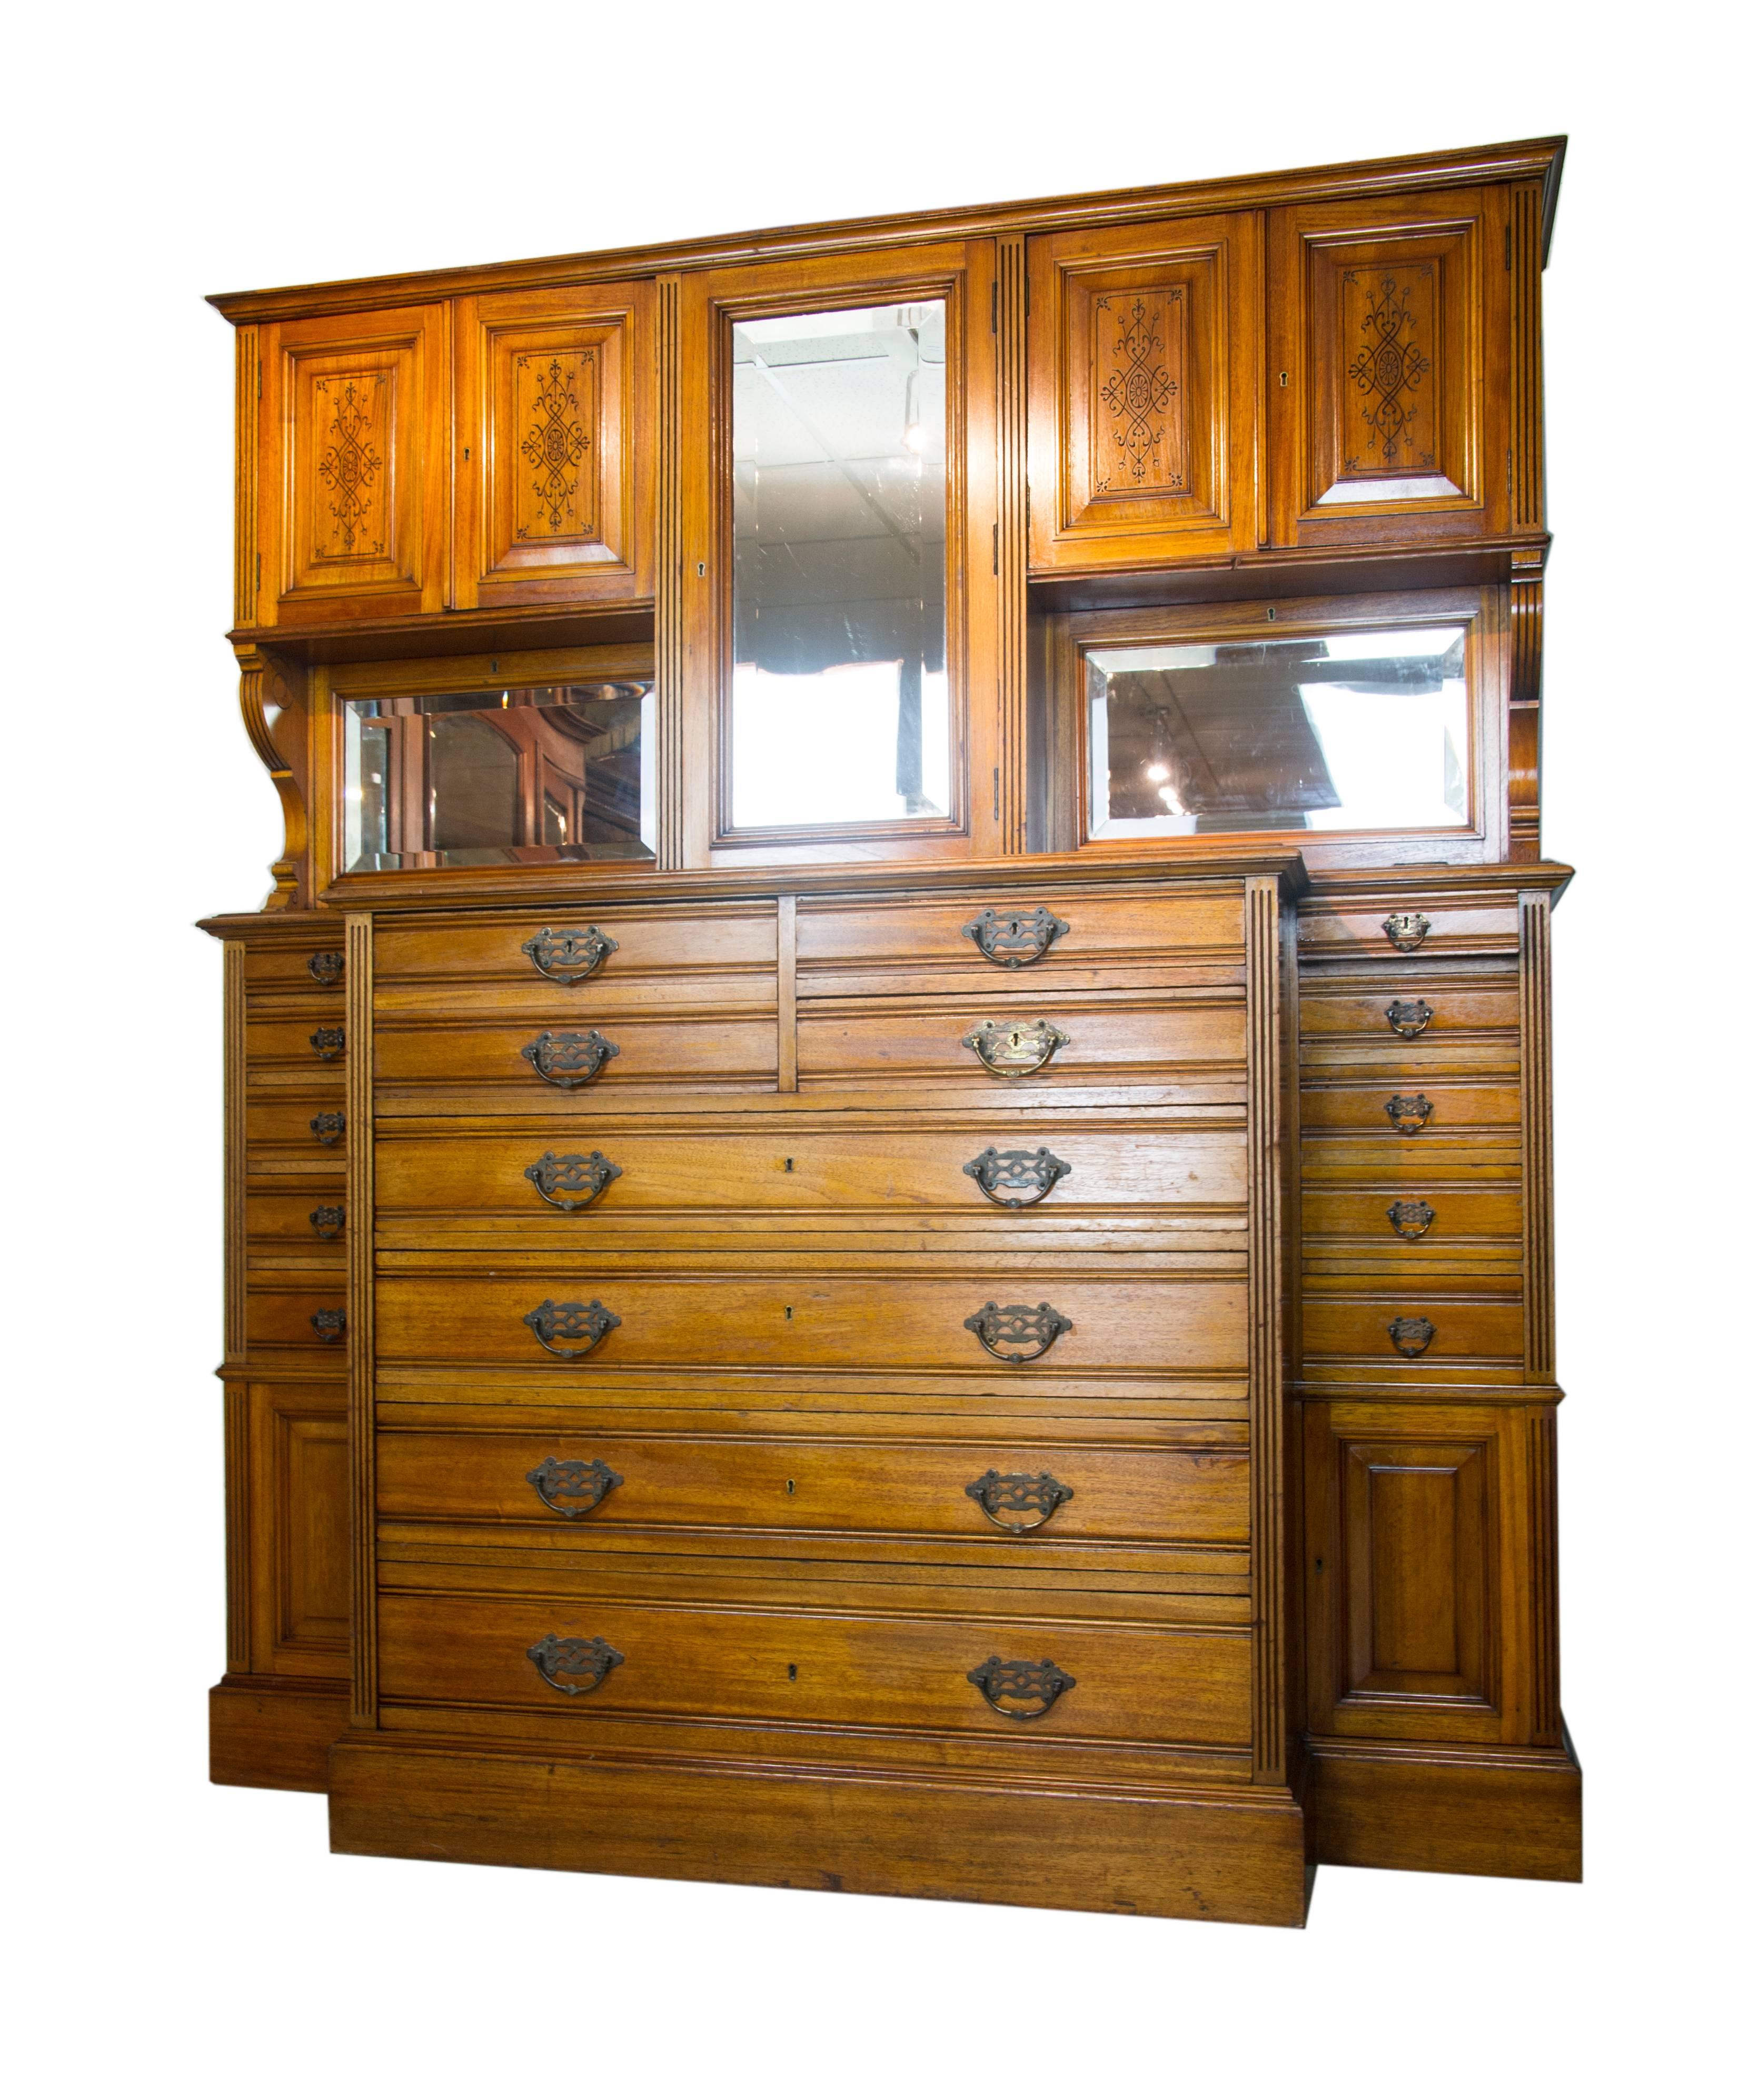 Victorian Antique Apothecary Cabinet, Antique Dentist Cabinet, Walnut, 1870, B1061 REDUCED